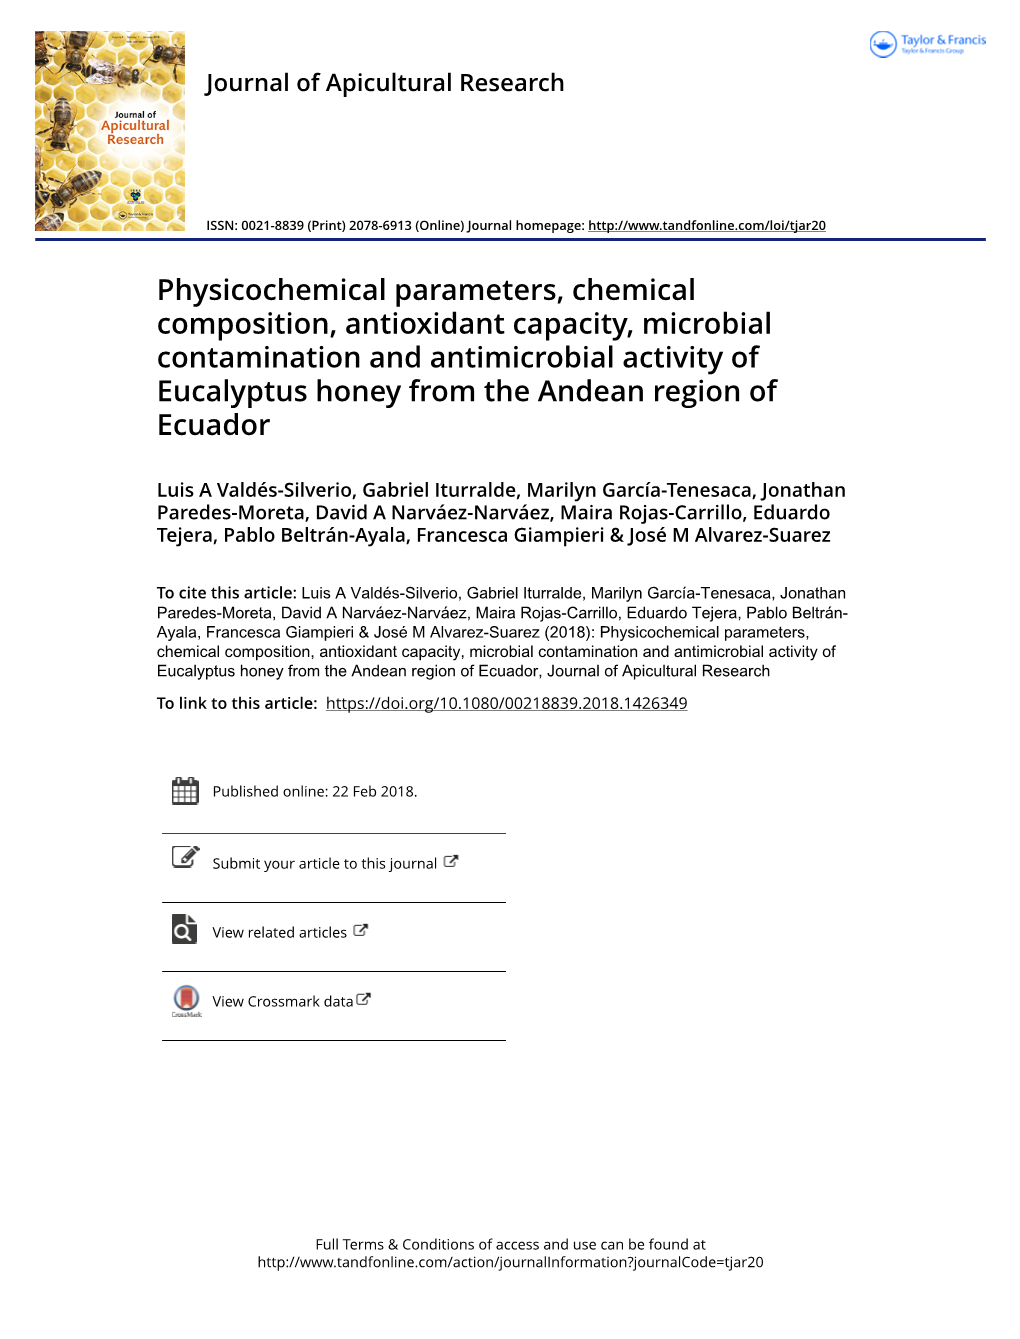 Physicochemical Parameters, Chemical Composition, Antioxidant Capacity, Microbial Contamination and Antimicrobial Activity of Eu